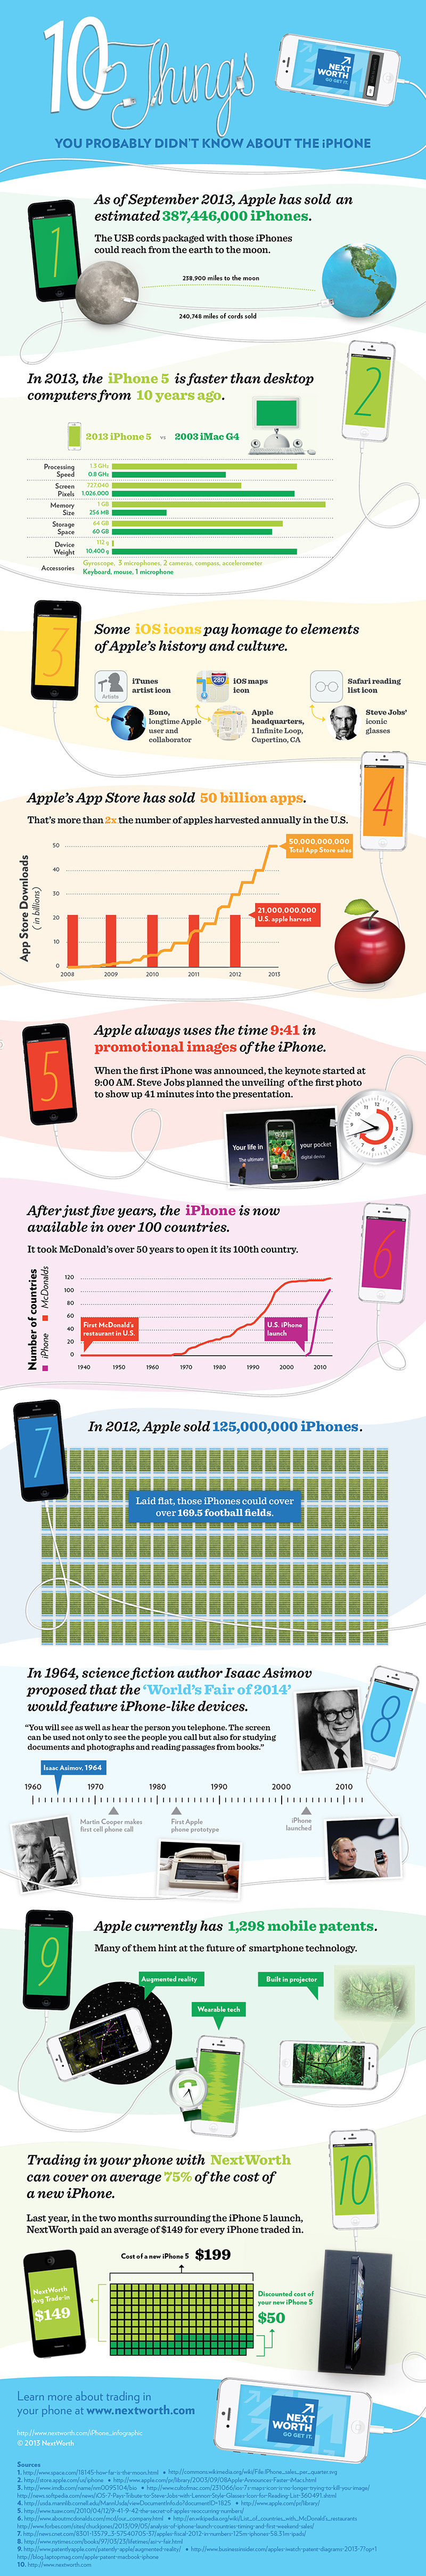 iPhone Facts Infographic